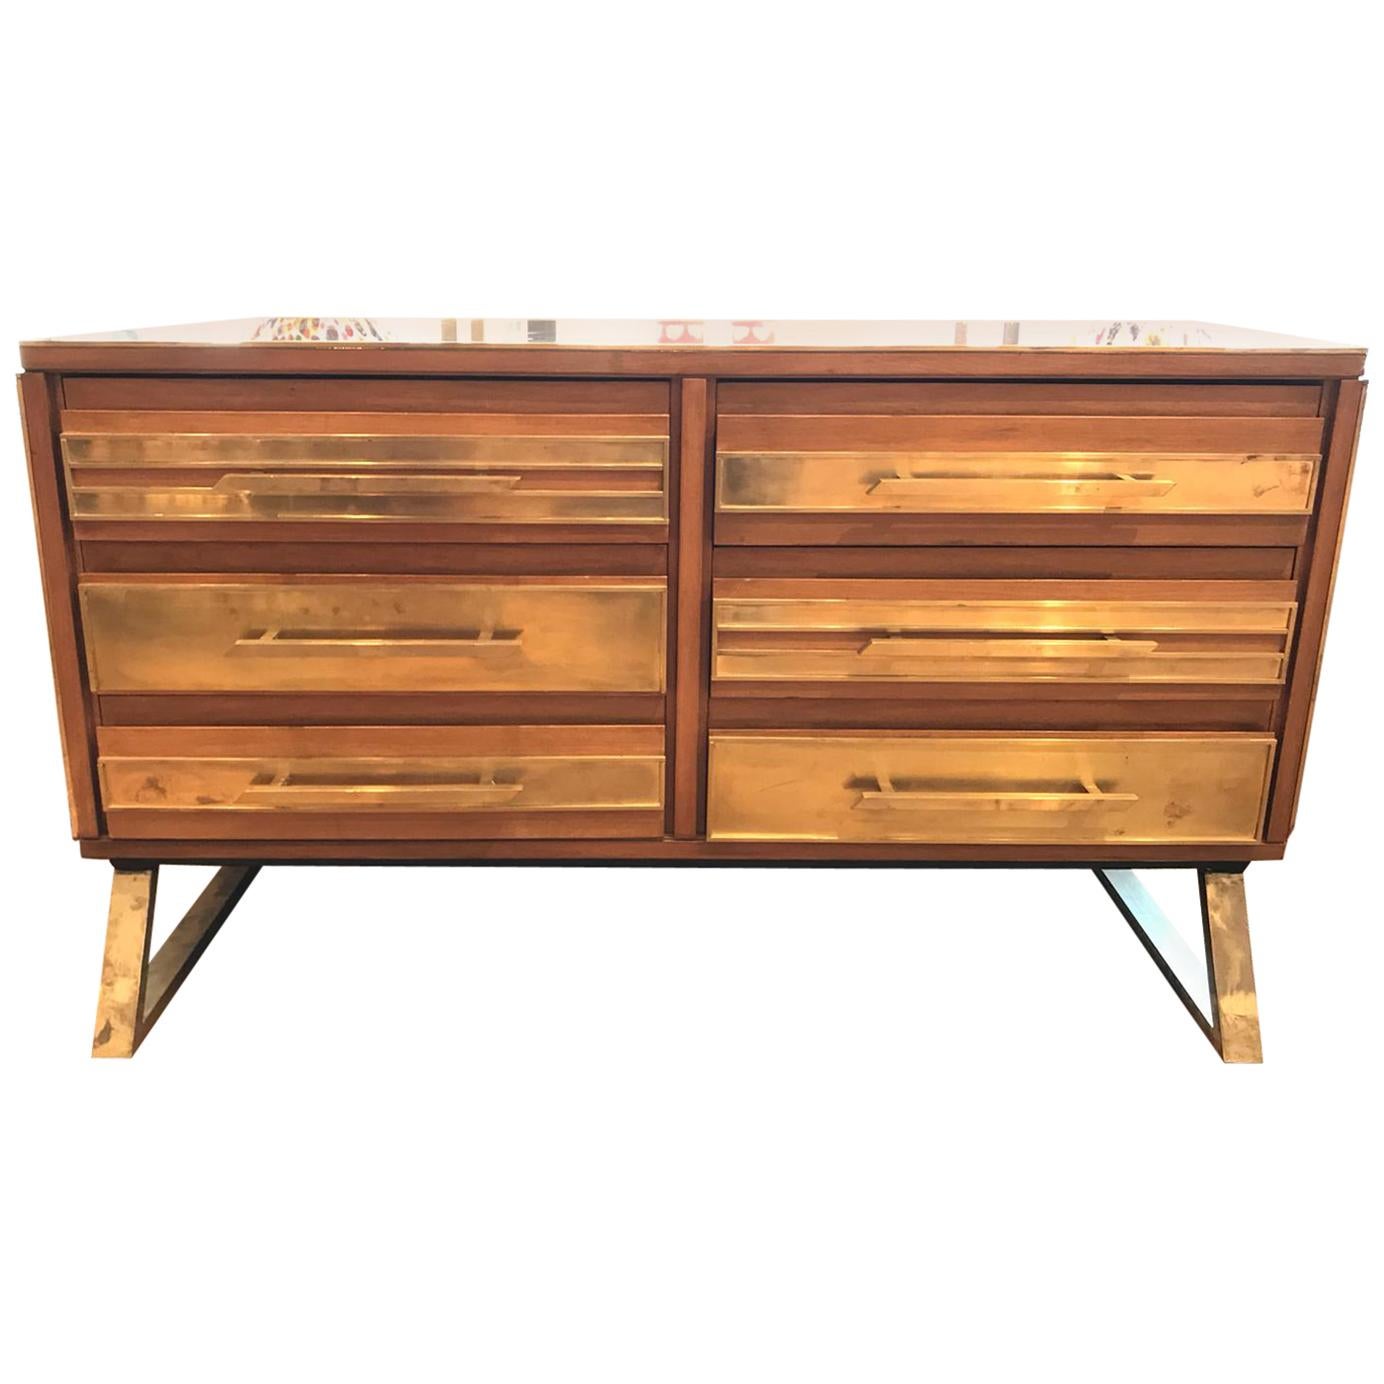 Small Sideboard, Made in Italy by Craftsman, Handmade, 1990s For Sale